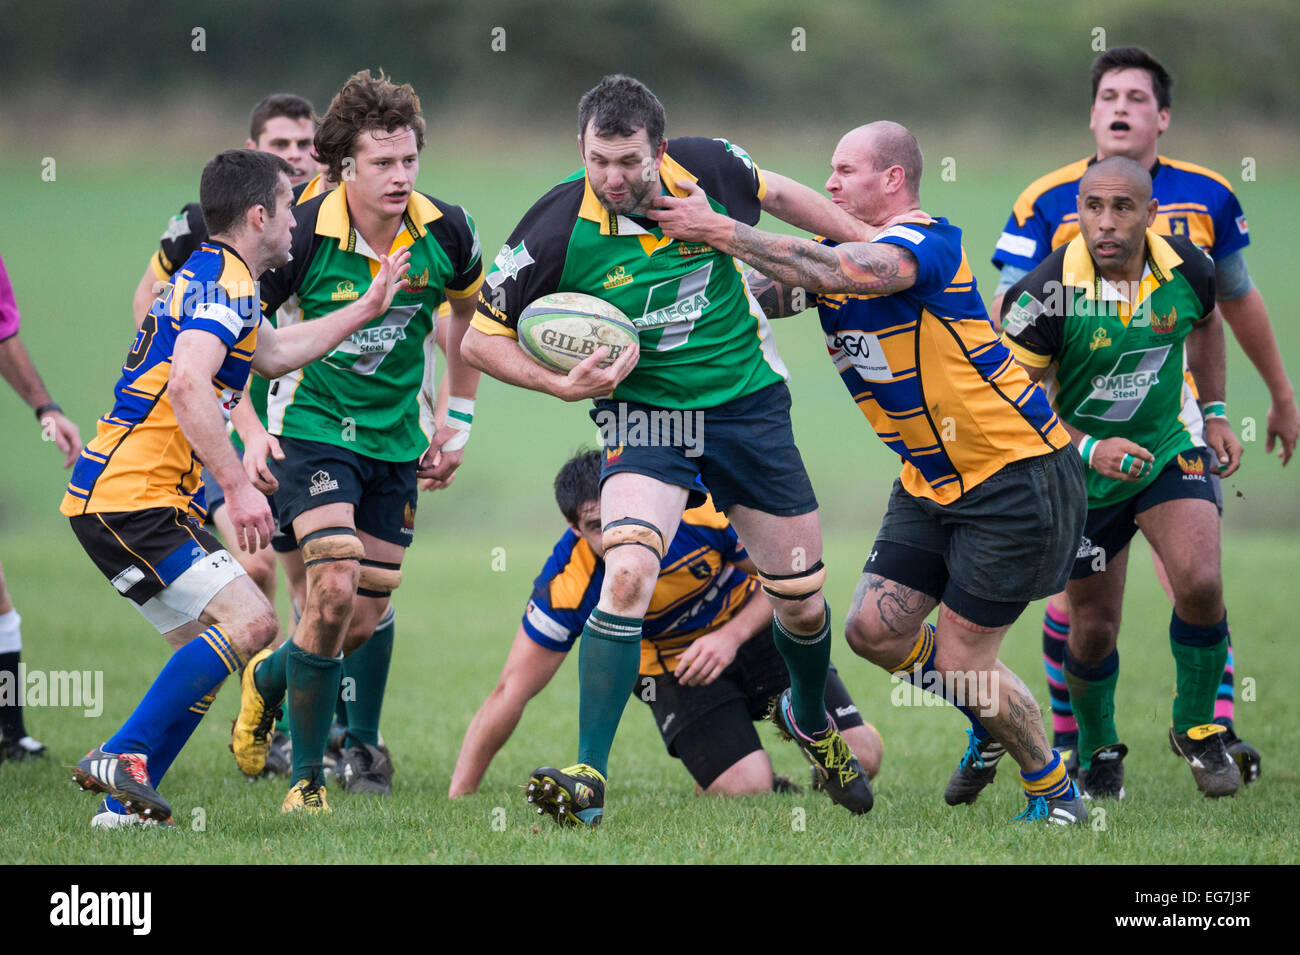 Rugby, player being tackled. Stock Photo